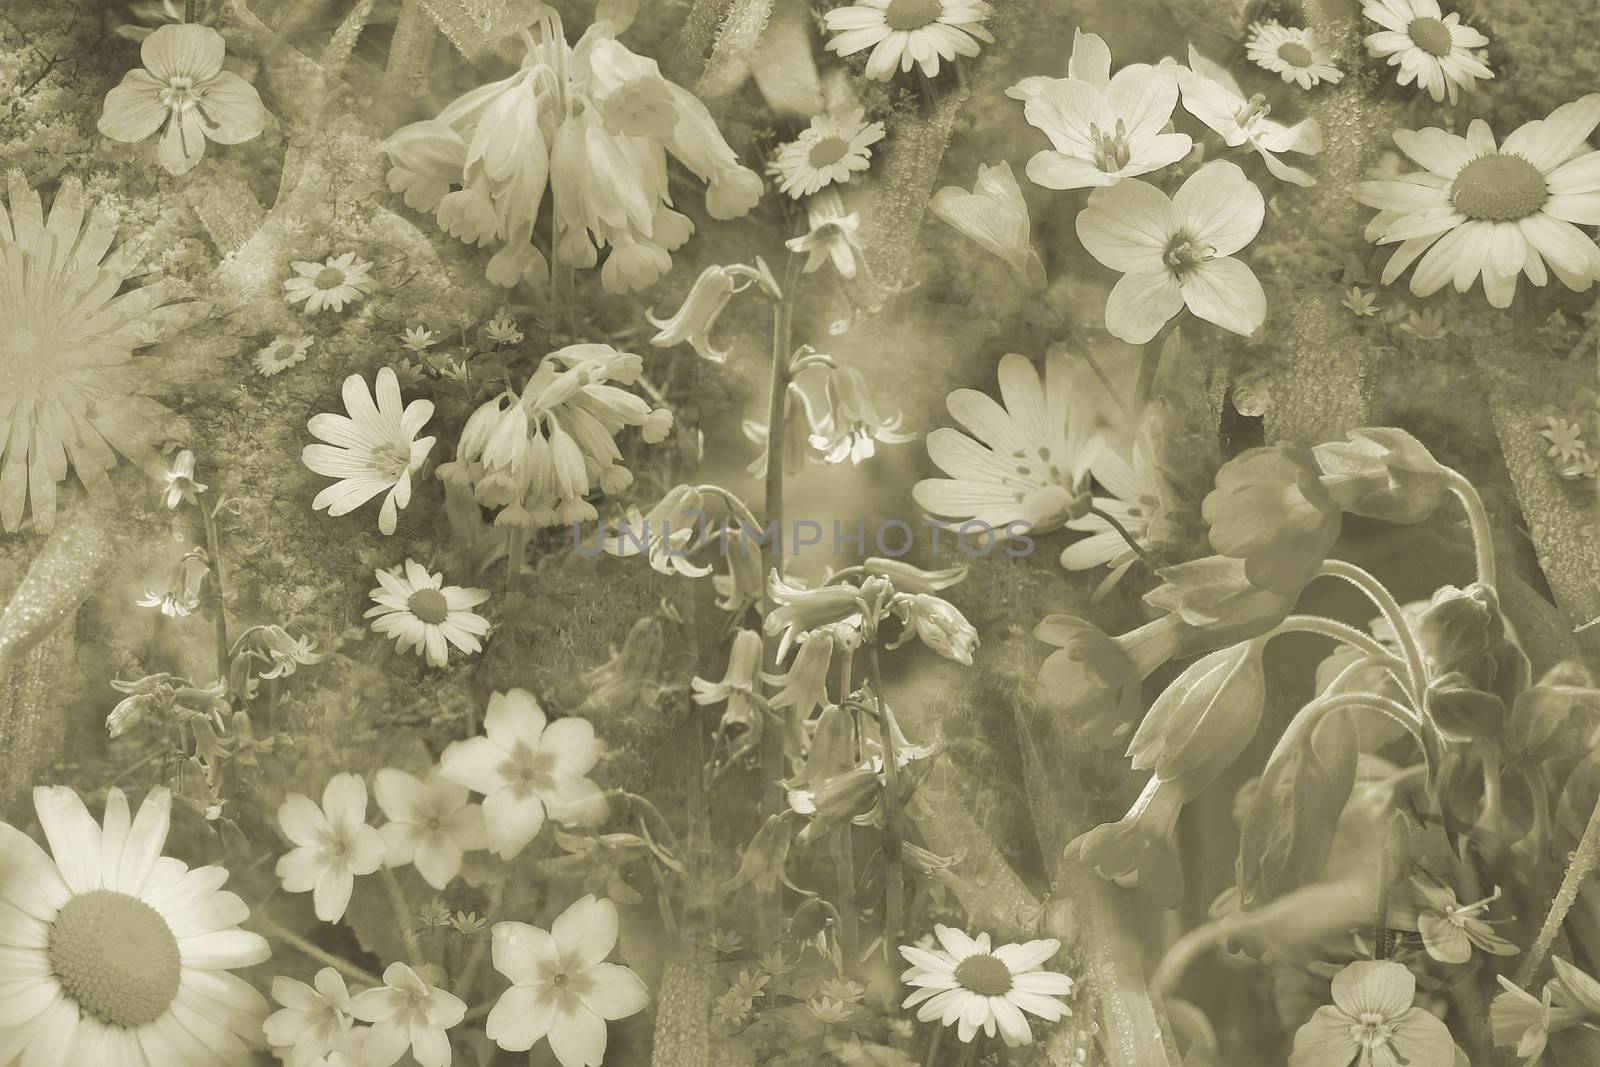 Pretty wild flowers montage in sepia.